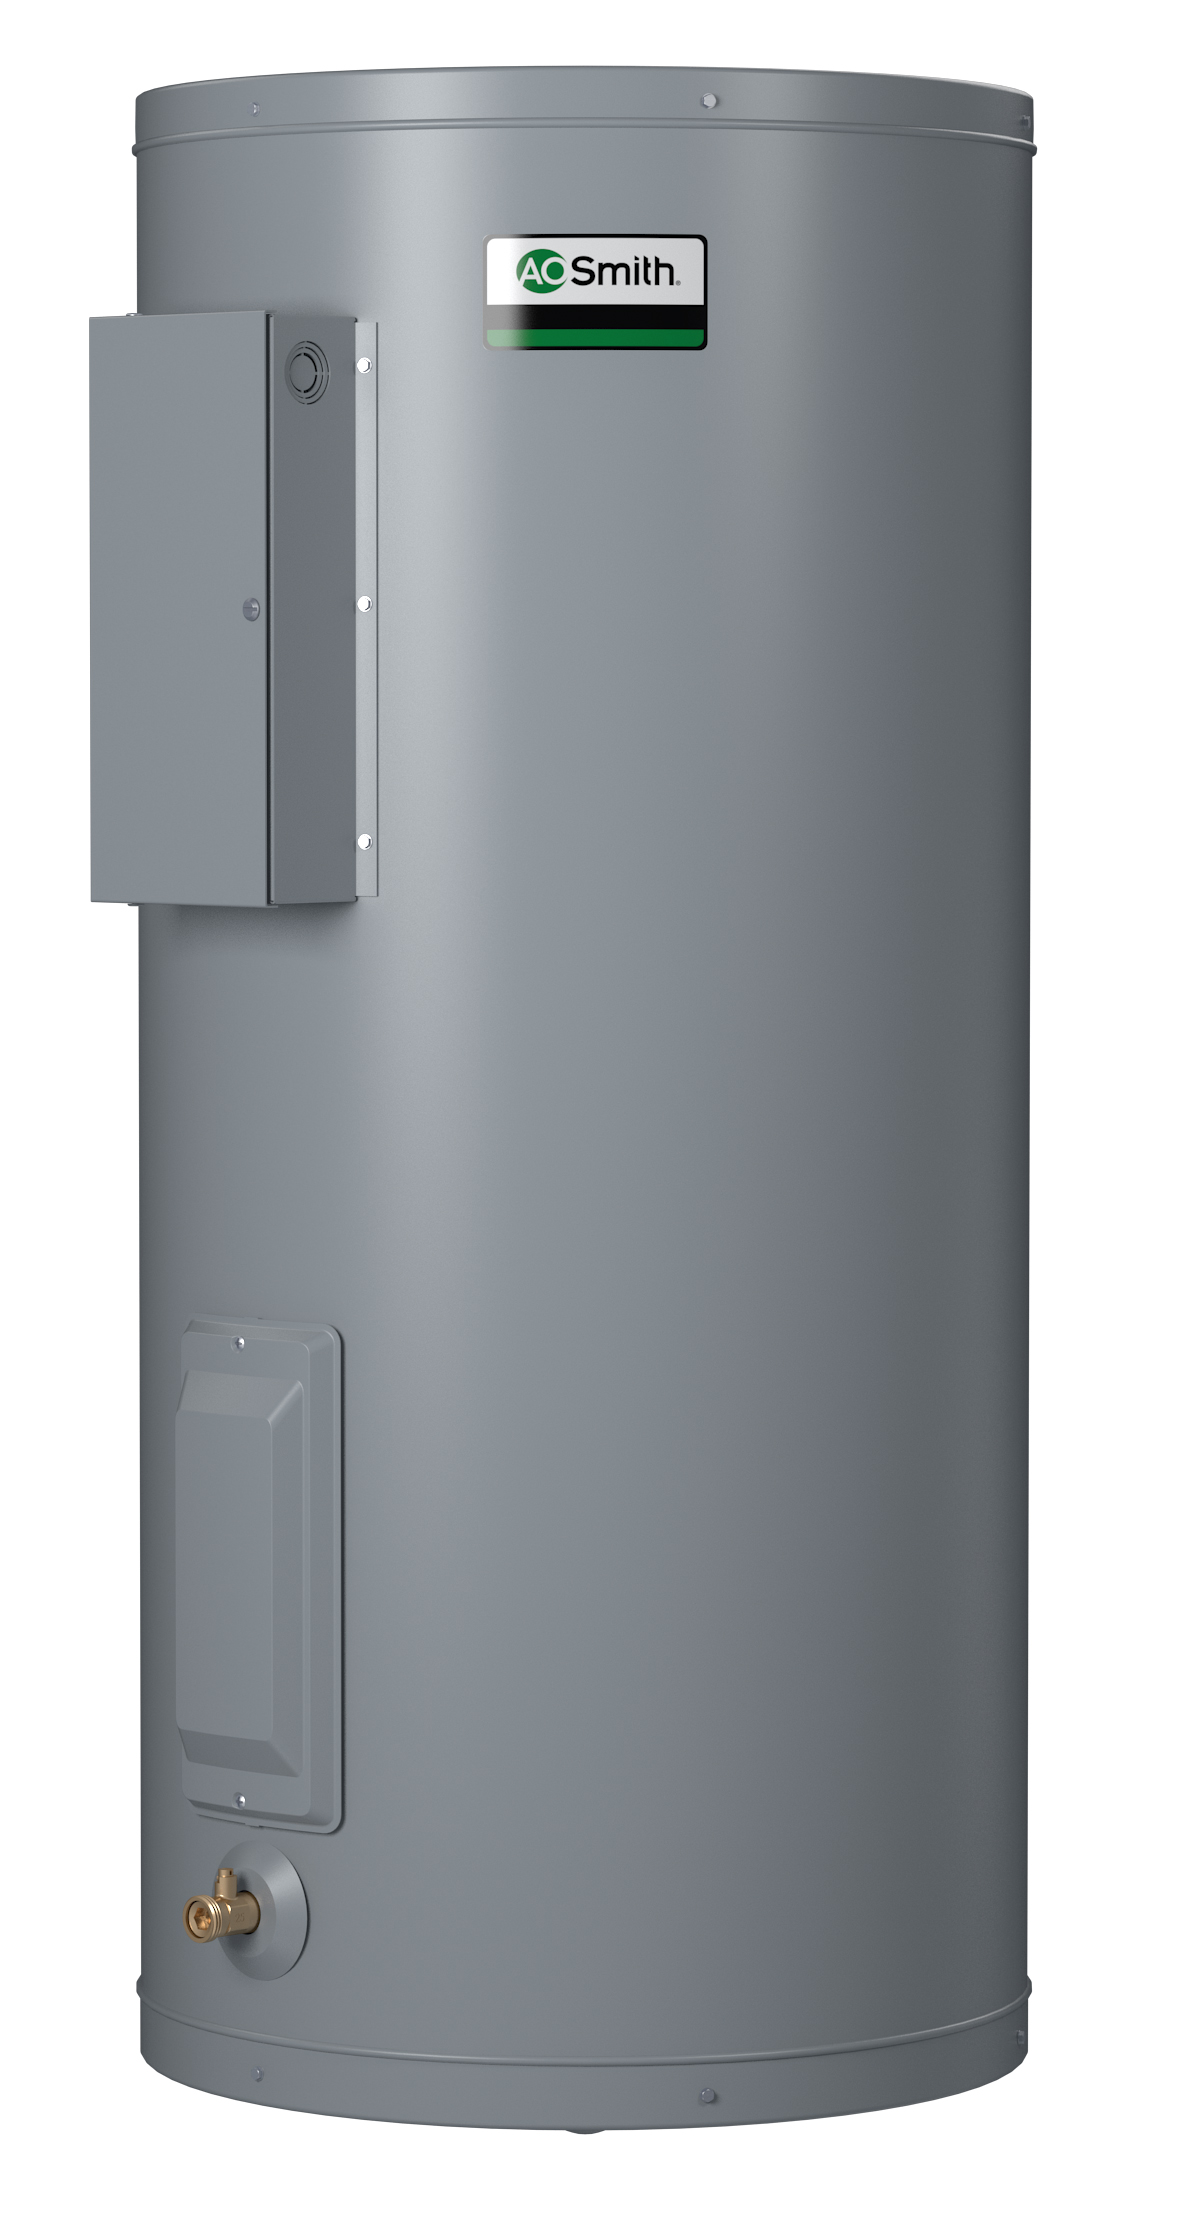 AO SMITH DEL-10S: 10 GALLONS, 2.5KW, 208 VOLT, 12.01 AMPS, 1 PHASE, SINGLE ELEMENT, LIGHT DUTY COMMERCIAL ELECTRIC WATER HEATER, DURA-POWER